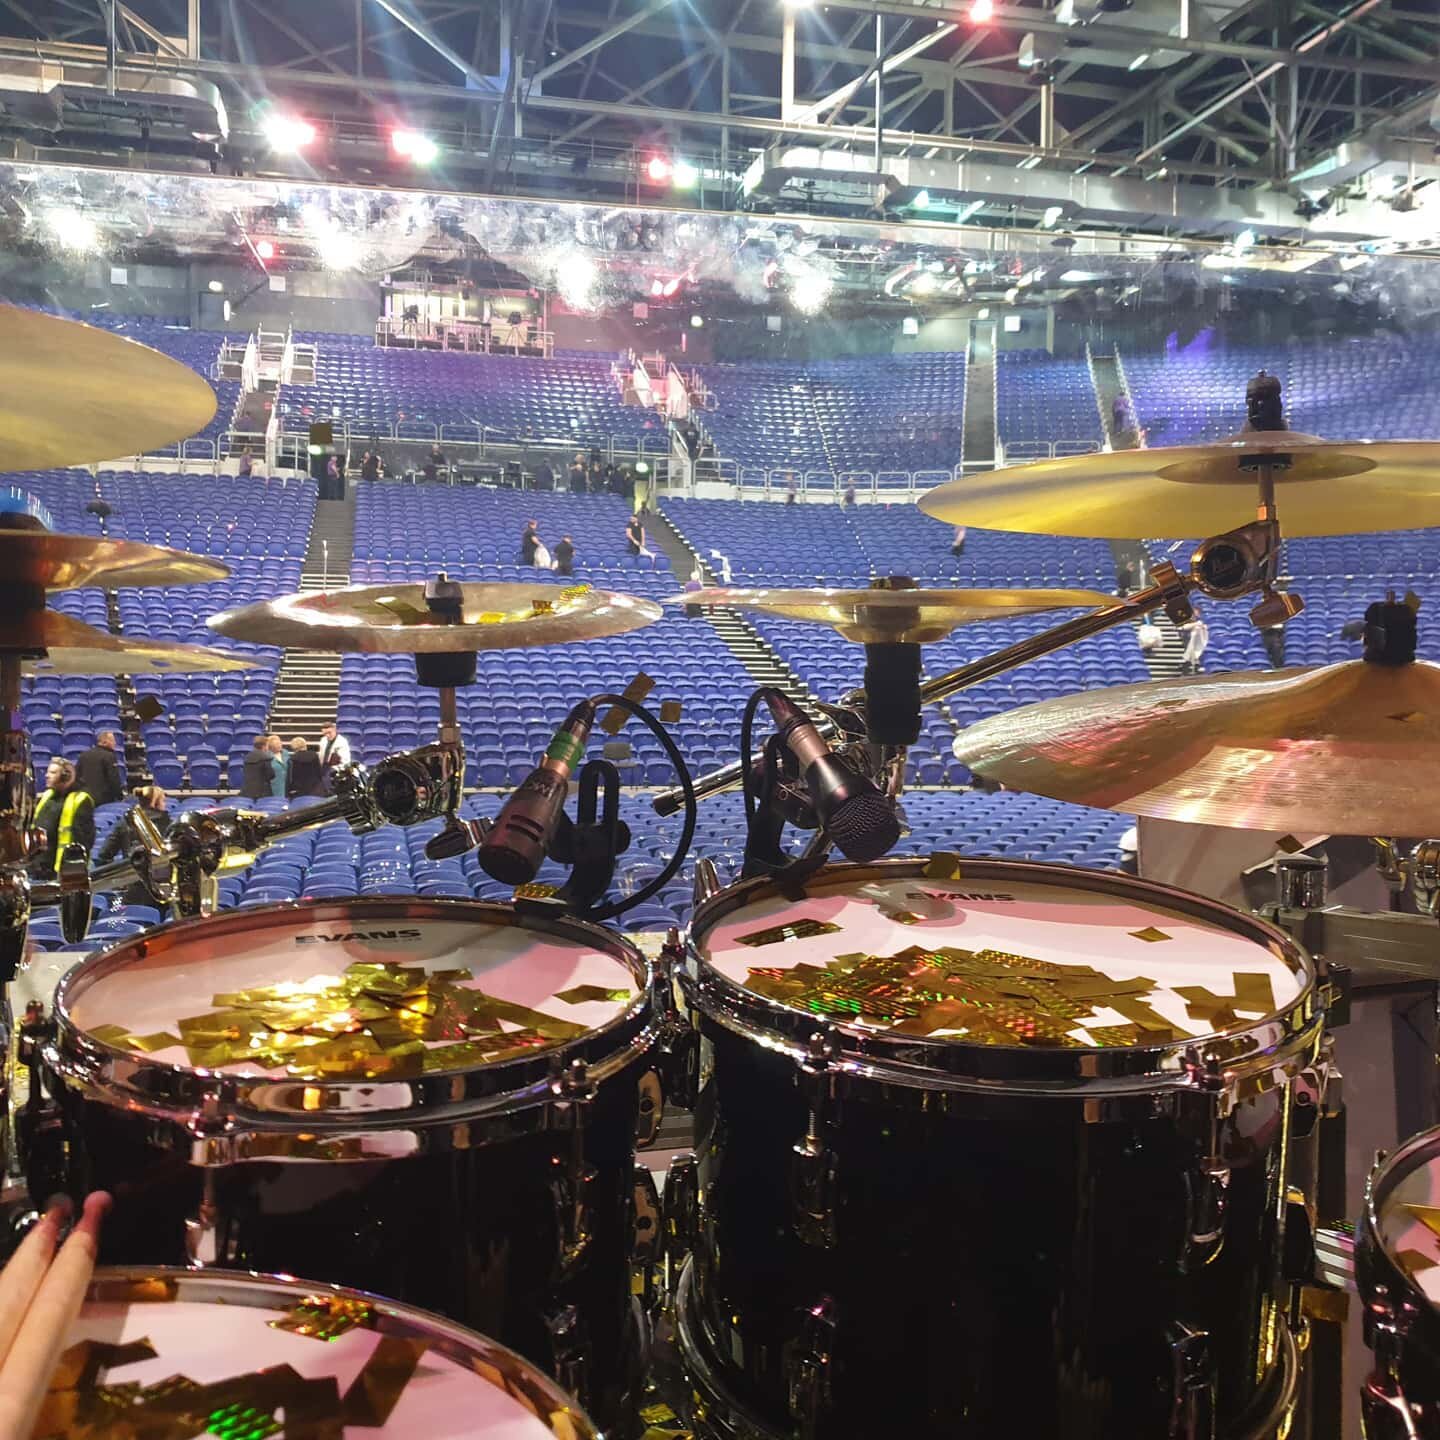 Amazing sold out week of shows in Dublin with Riverdance in the 3 Arena!
#riverdance #pearldrums #zildjian  #evansdrumheads #vaterdrumsticks #earthworksmicrophones #porteranddavies